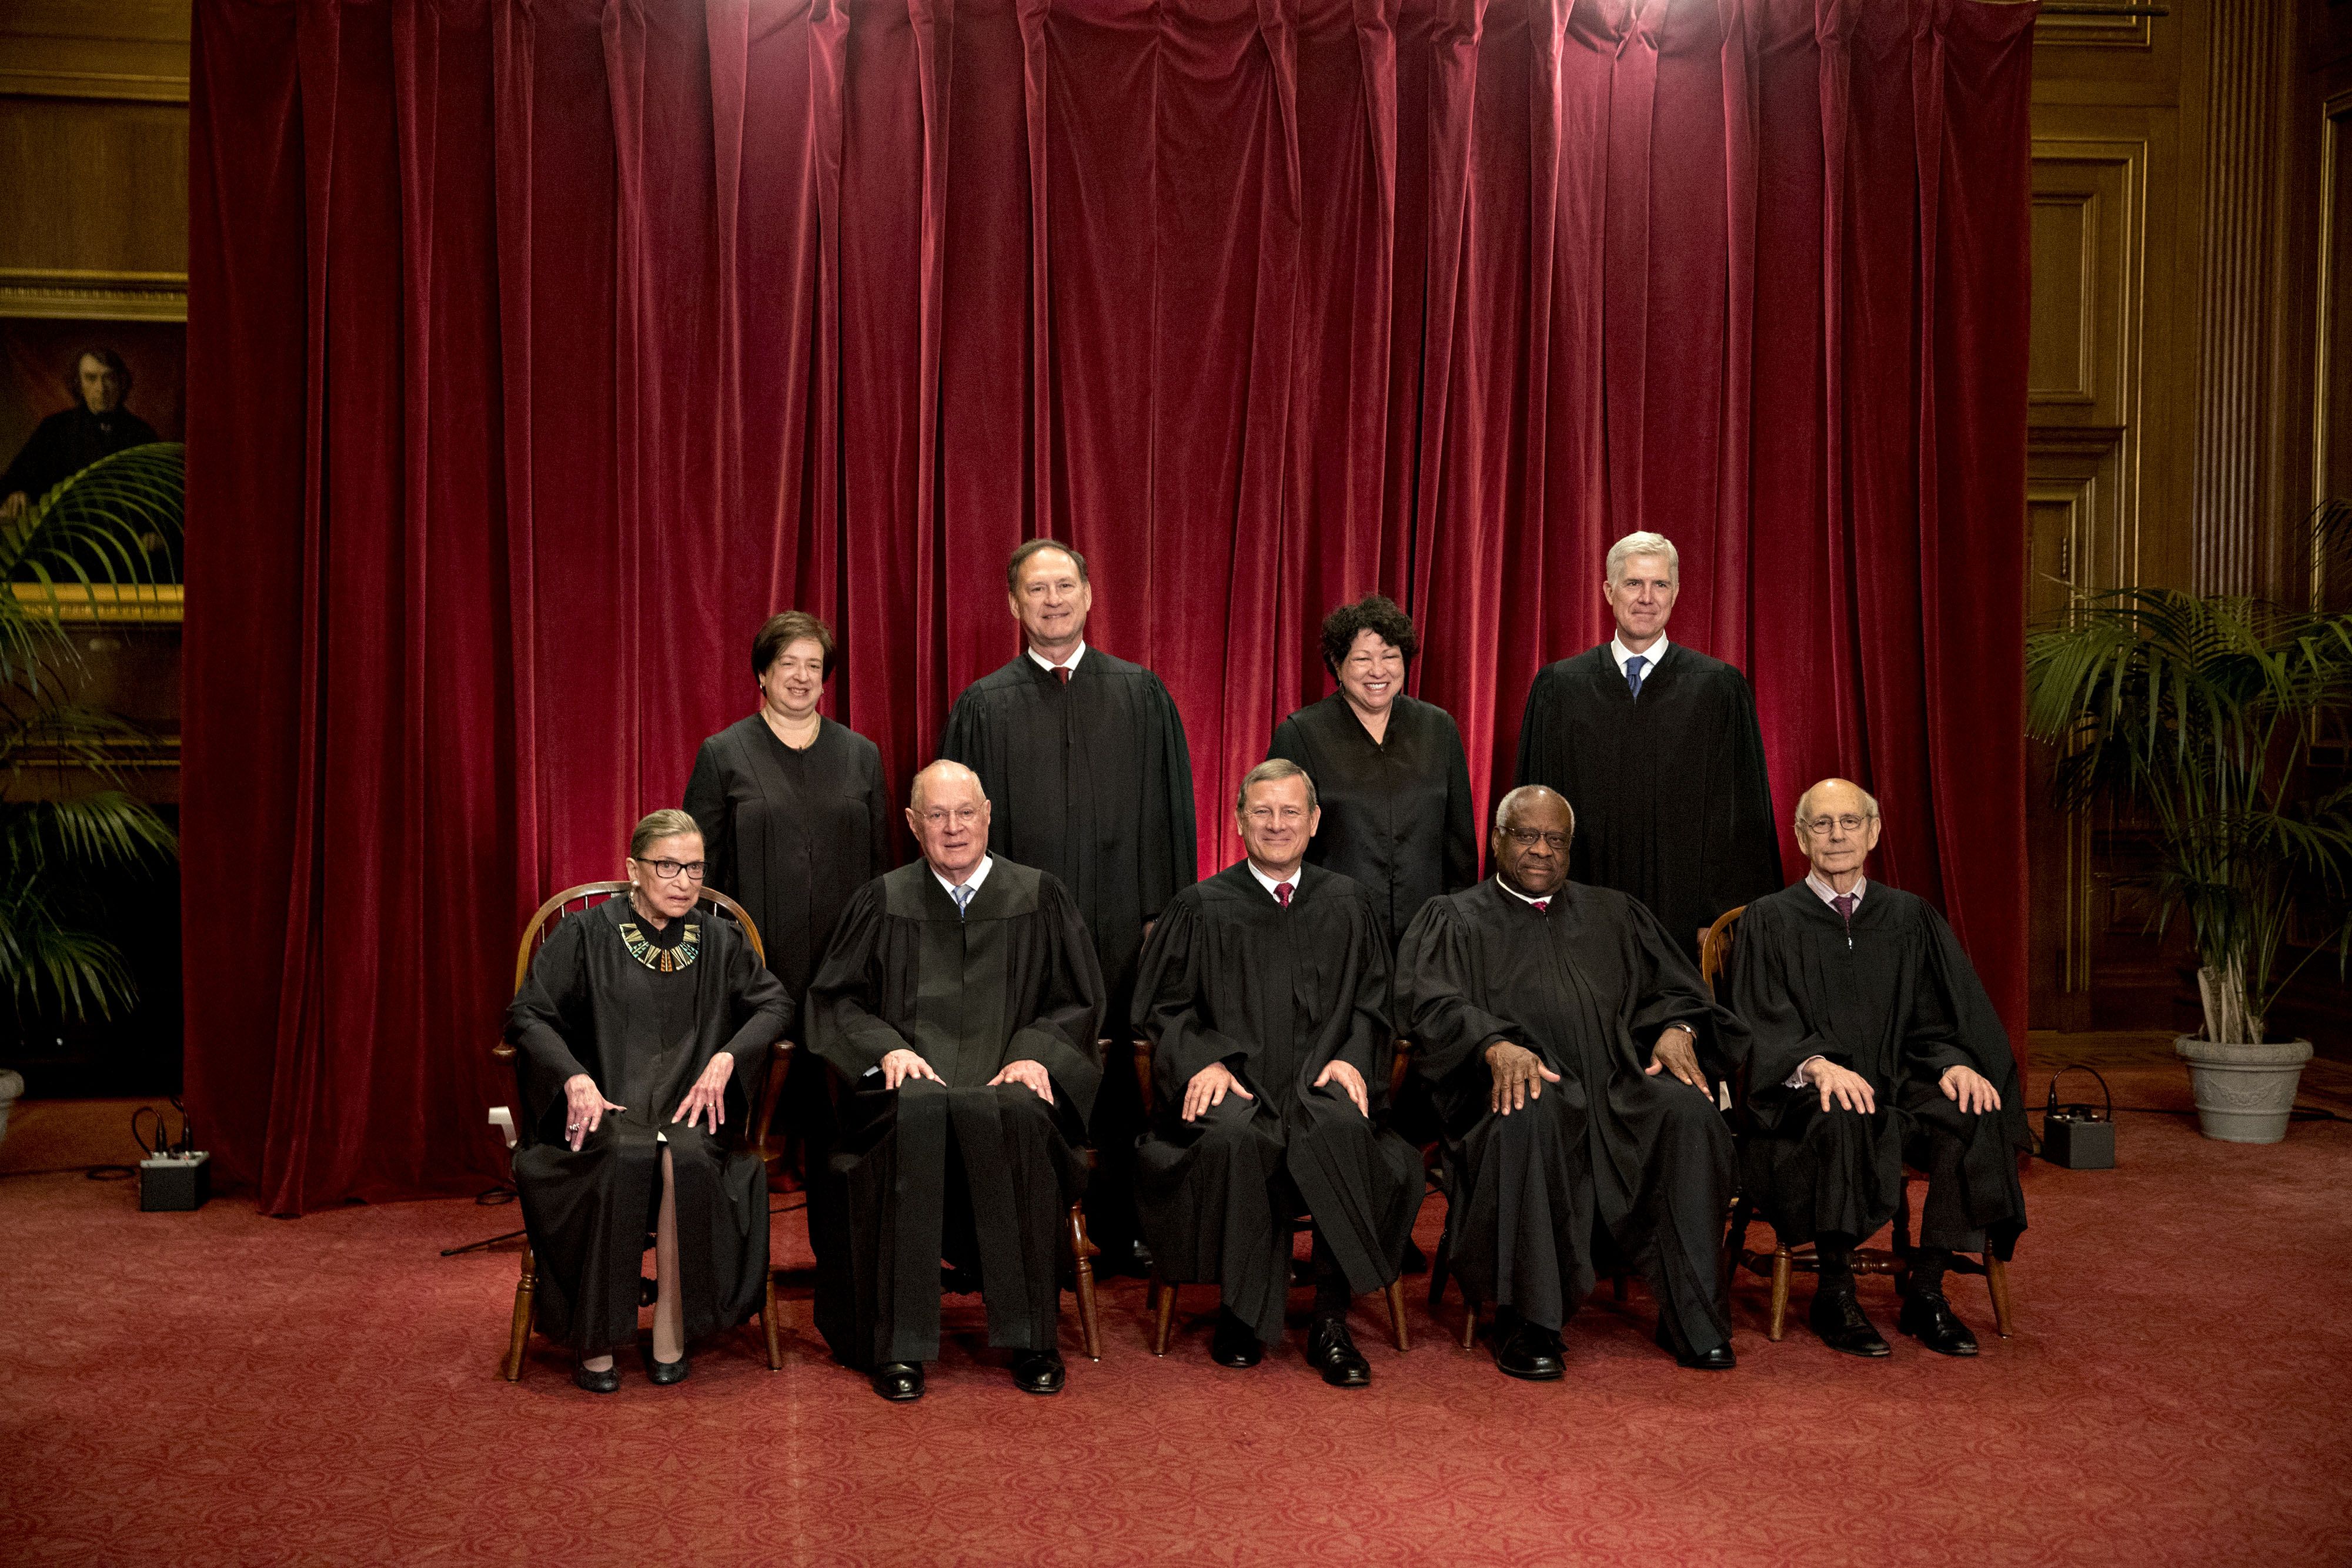 (L-R) Associate Justice Ruth Bader Ginsburg, Associate Justice Anthony Kennedy, Chief Justice John Roberts, Associate Justice Clarence Thomas, and Associate Justice Stephen Breyer. Standing left to right; Associate Justice Elena Kagan, Associate Justice Samuel Alito Jr., Associate Justice Sonia Sotomayor, and Associate Justice Neil Gorsuch during their formal group photograph in the East Conference Room of the Supreme Court in Washington, D.C., U.S., on Thursday, June 1, 2017. | Source: Getty Images